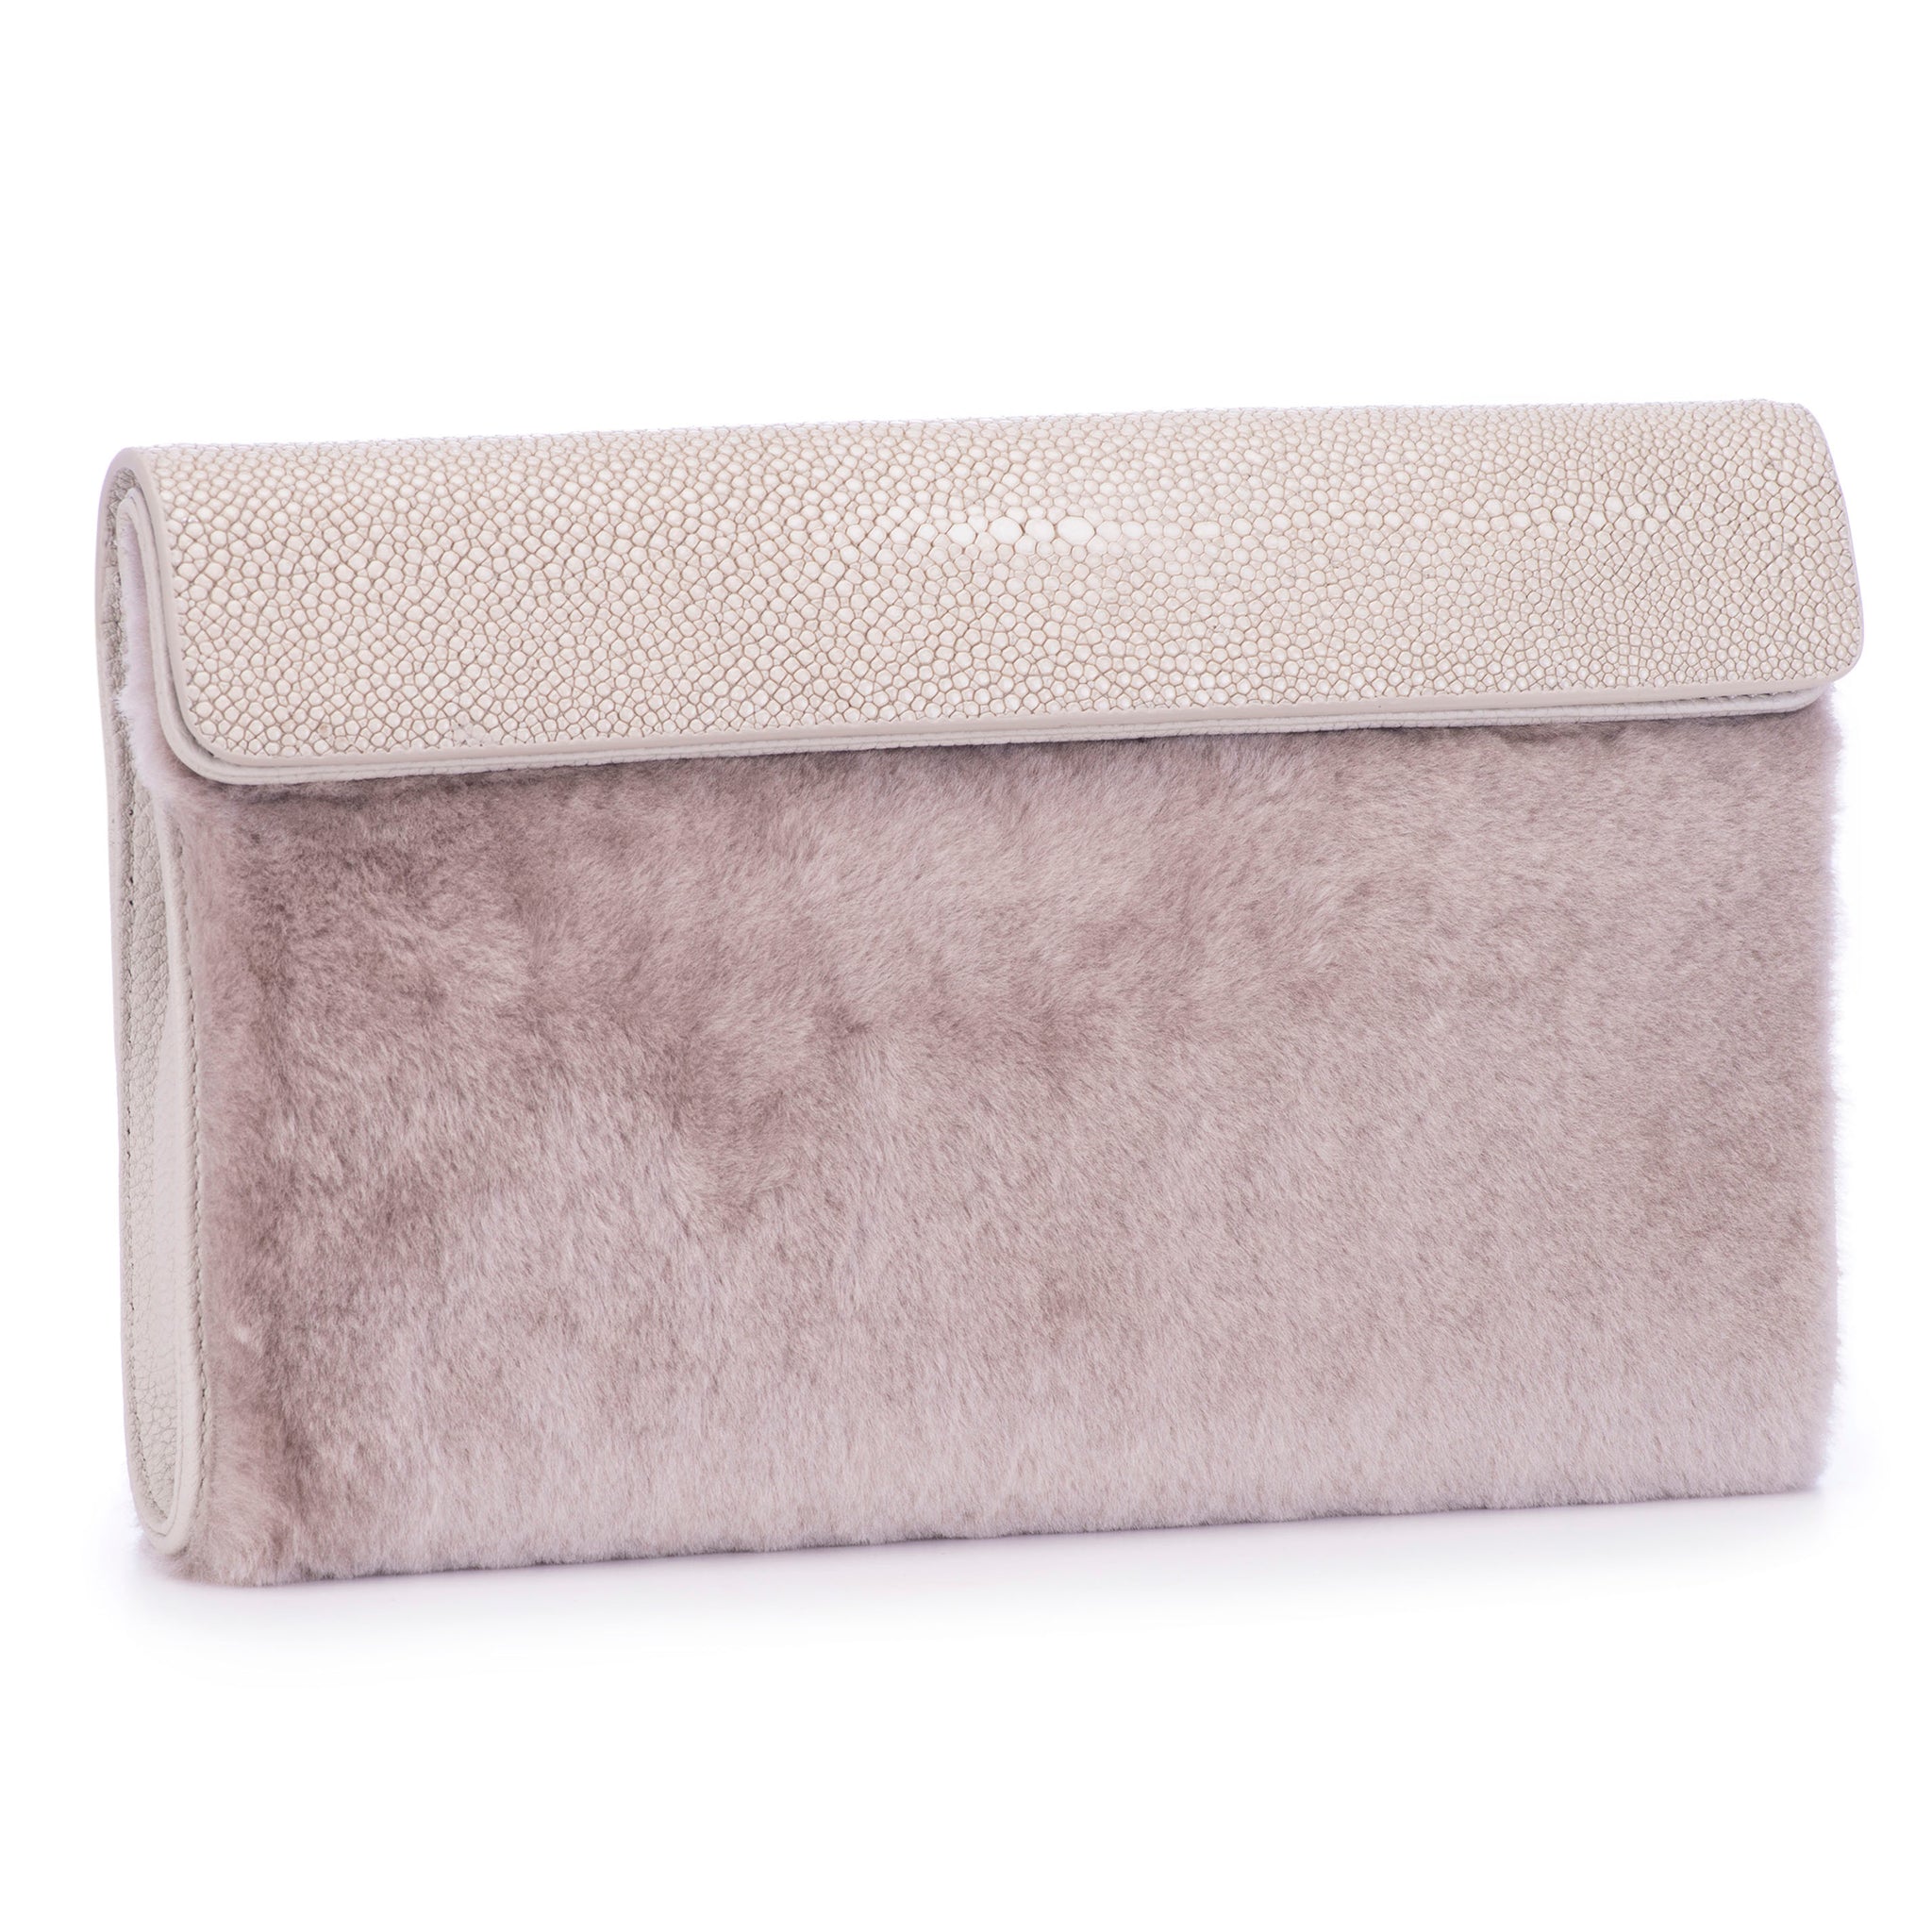 Cement Shagreen Light Gray Shearling Body Detachable Chain Holly Oversize Clutch Front Side View - Vivo Direct